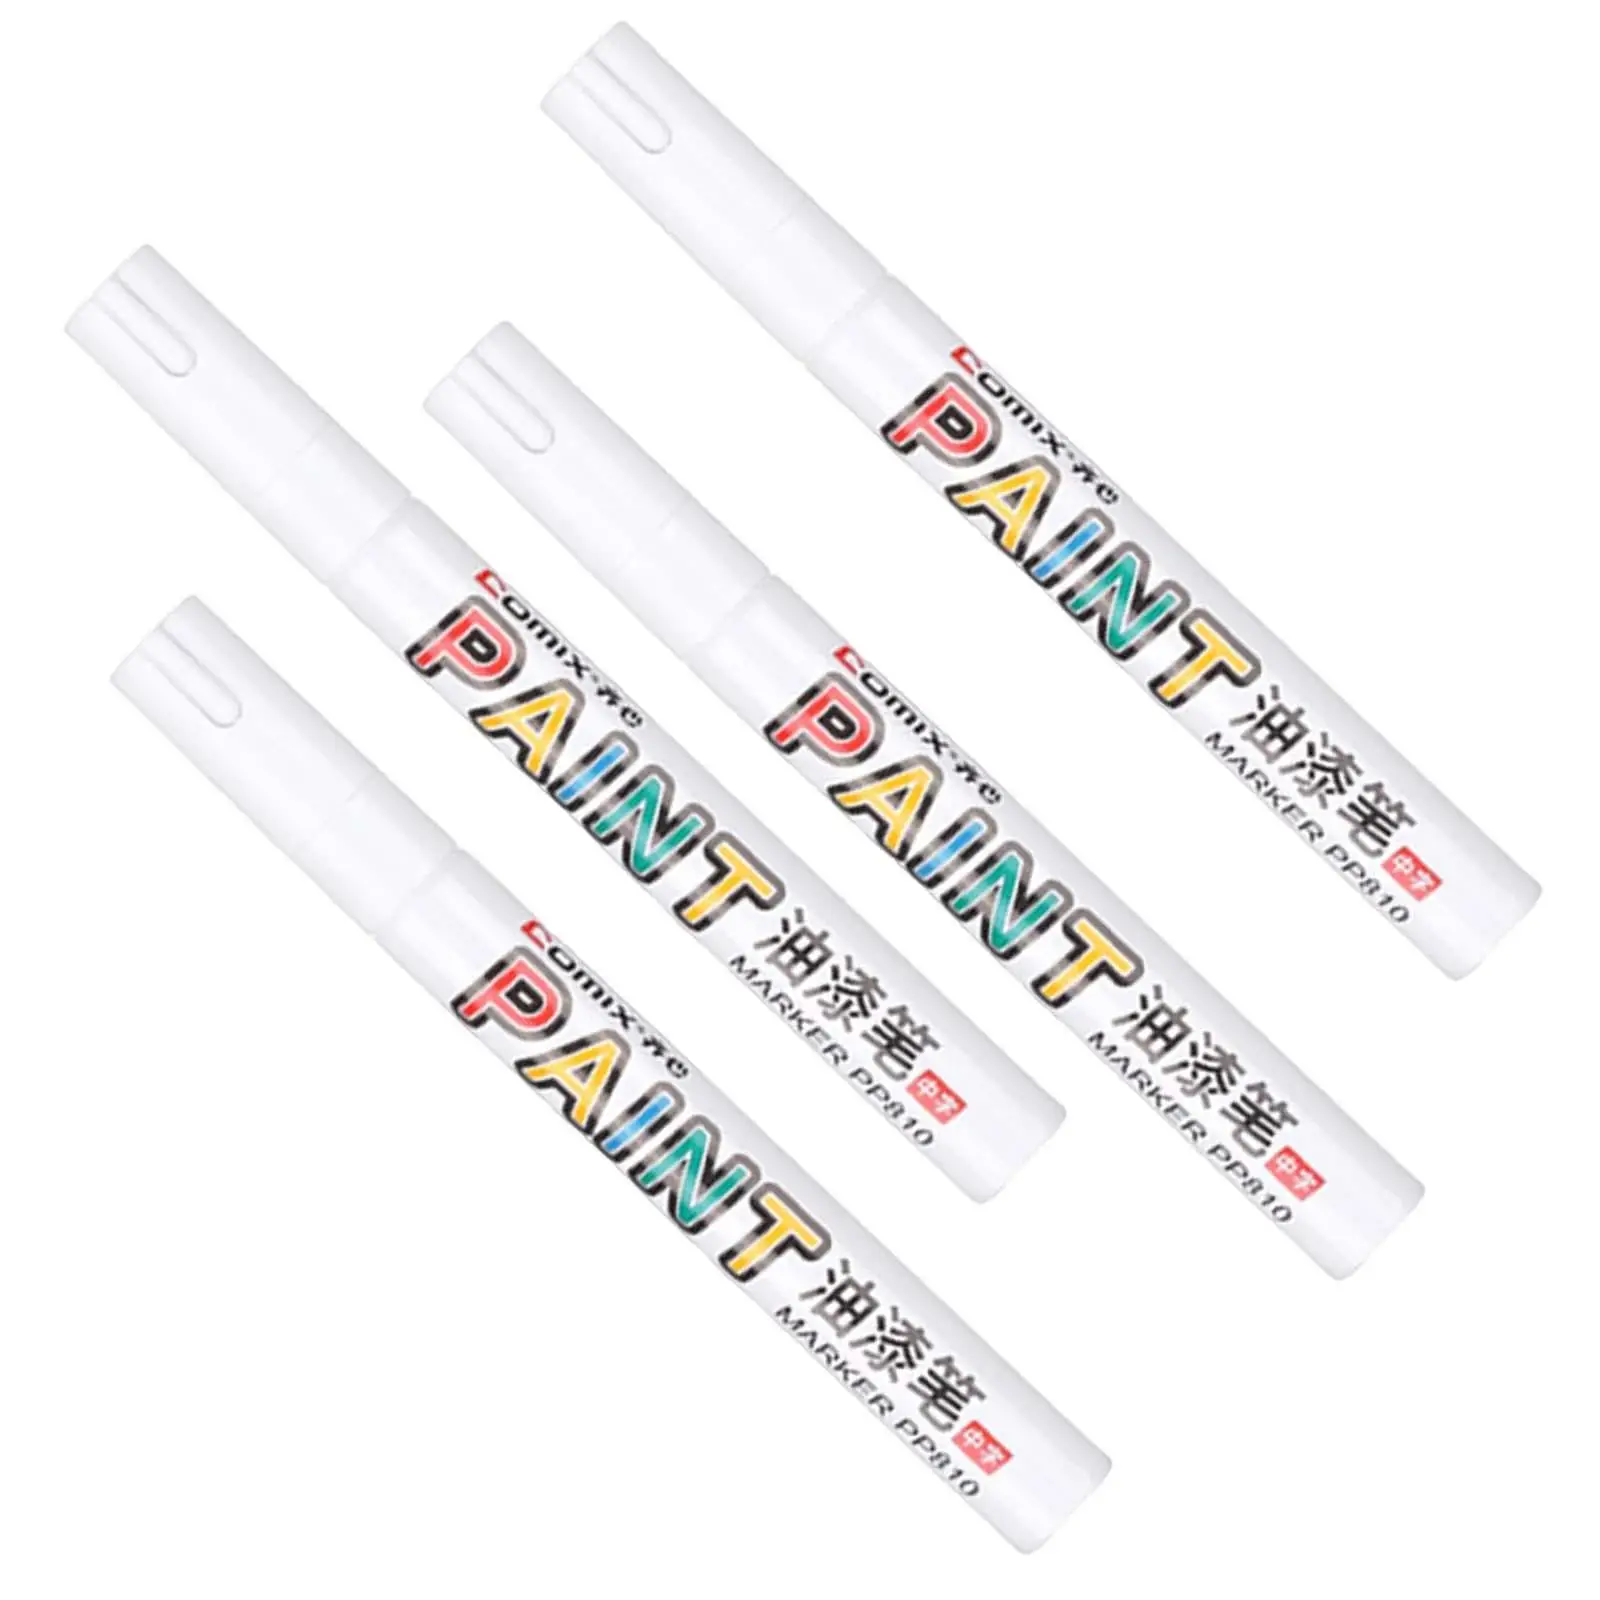 Paint Pens Permanent White Marker for Rock Painting, Fabric, Tire, Metal, Wood, Canvas, Glass, , Ceramic Visit the Store